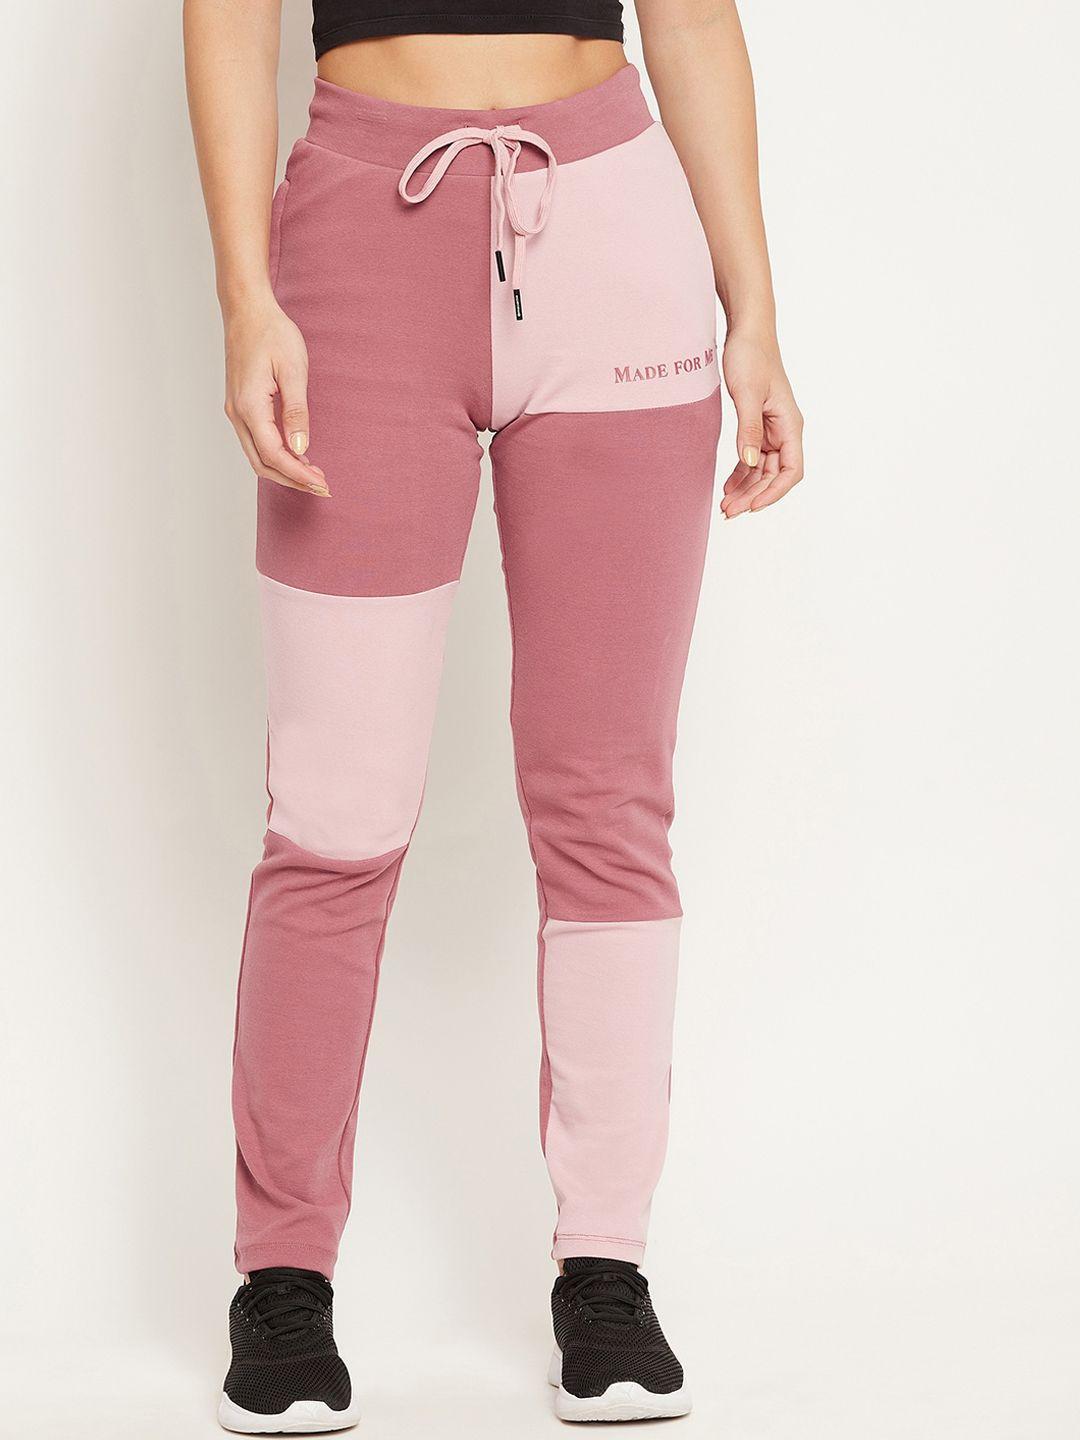 madame women pink colorblocked track pants